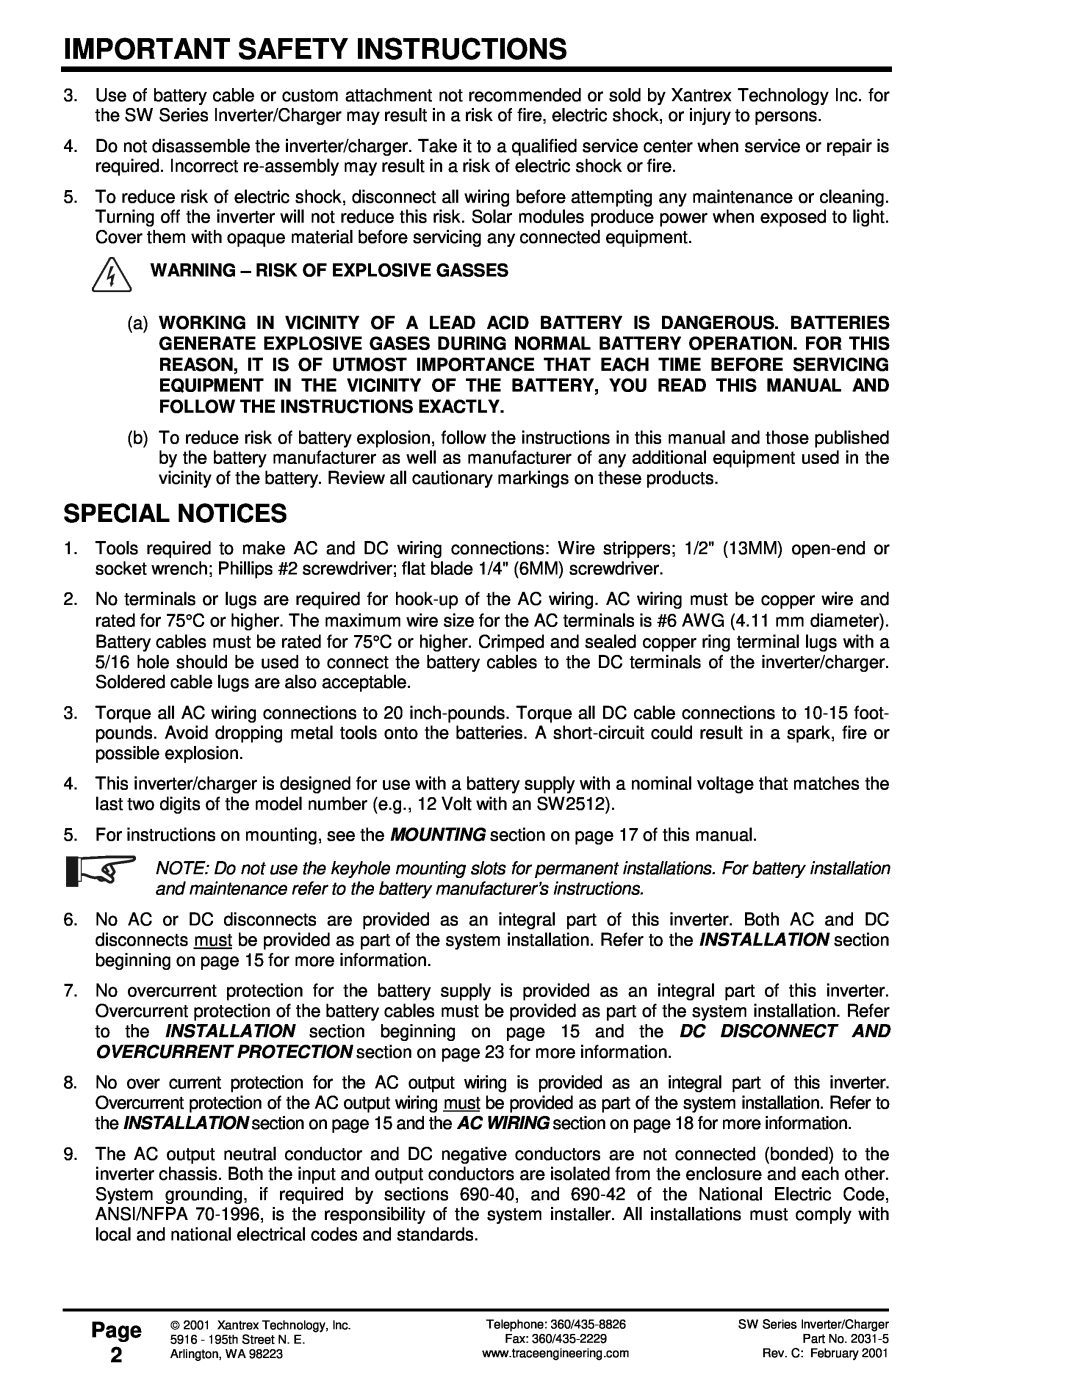 Xantrex Technology SW Series Special Notices, Page 2, Warning – Risk Of Explosive Gasses, Important Safety Instructions 